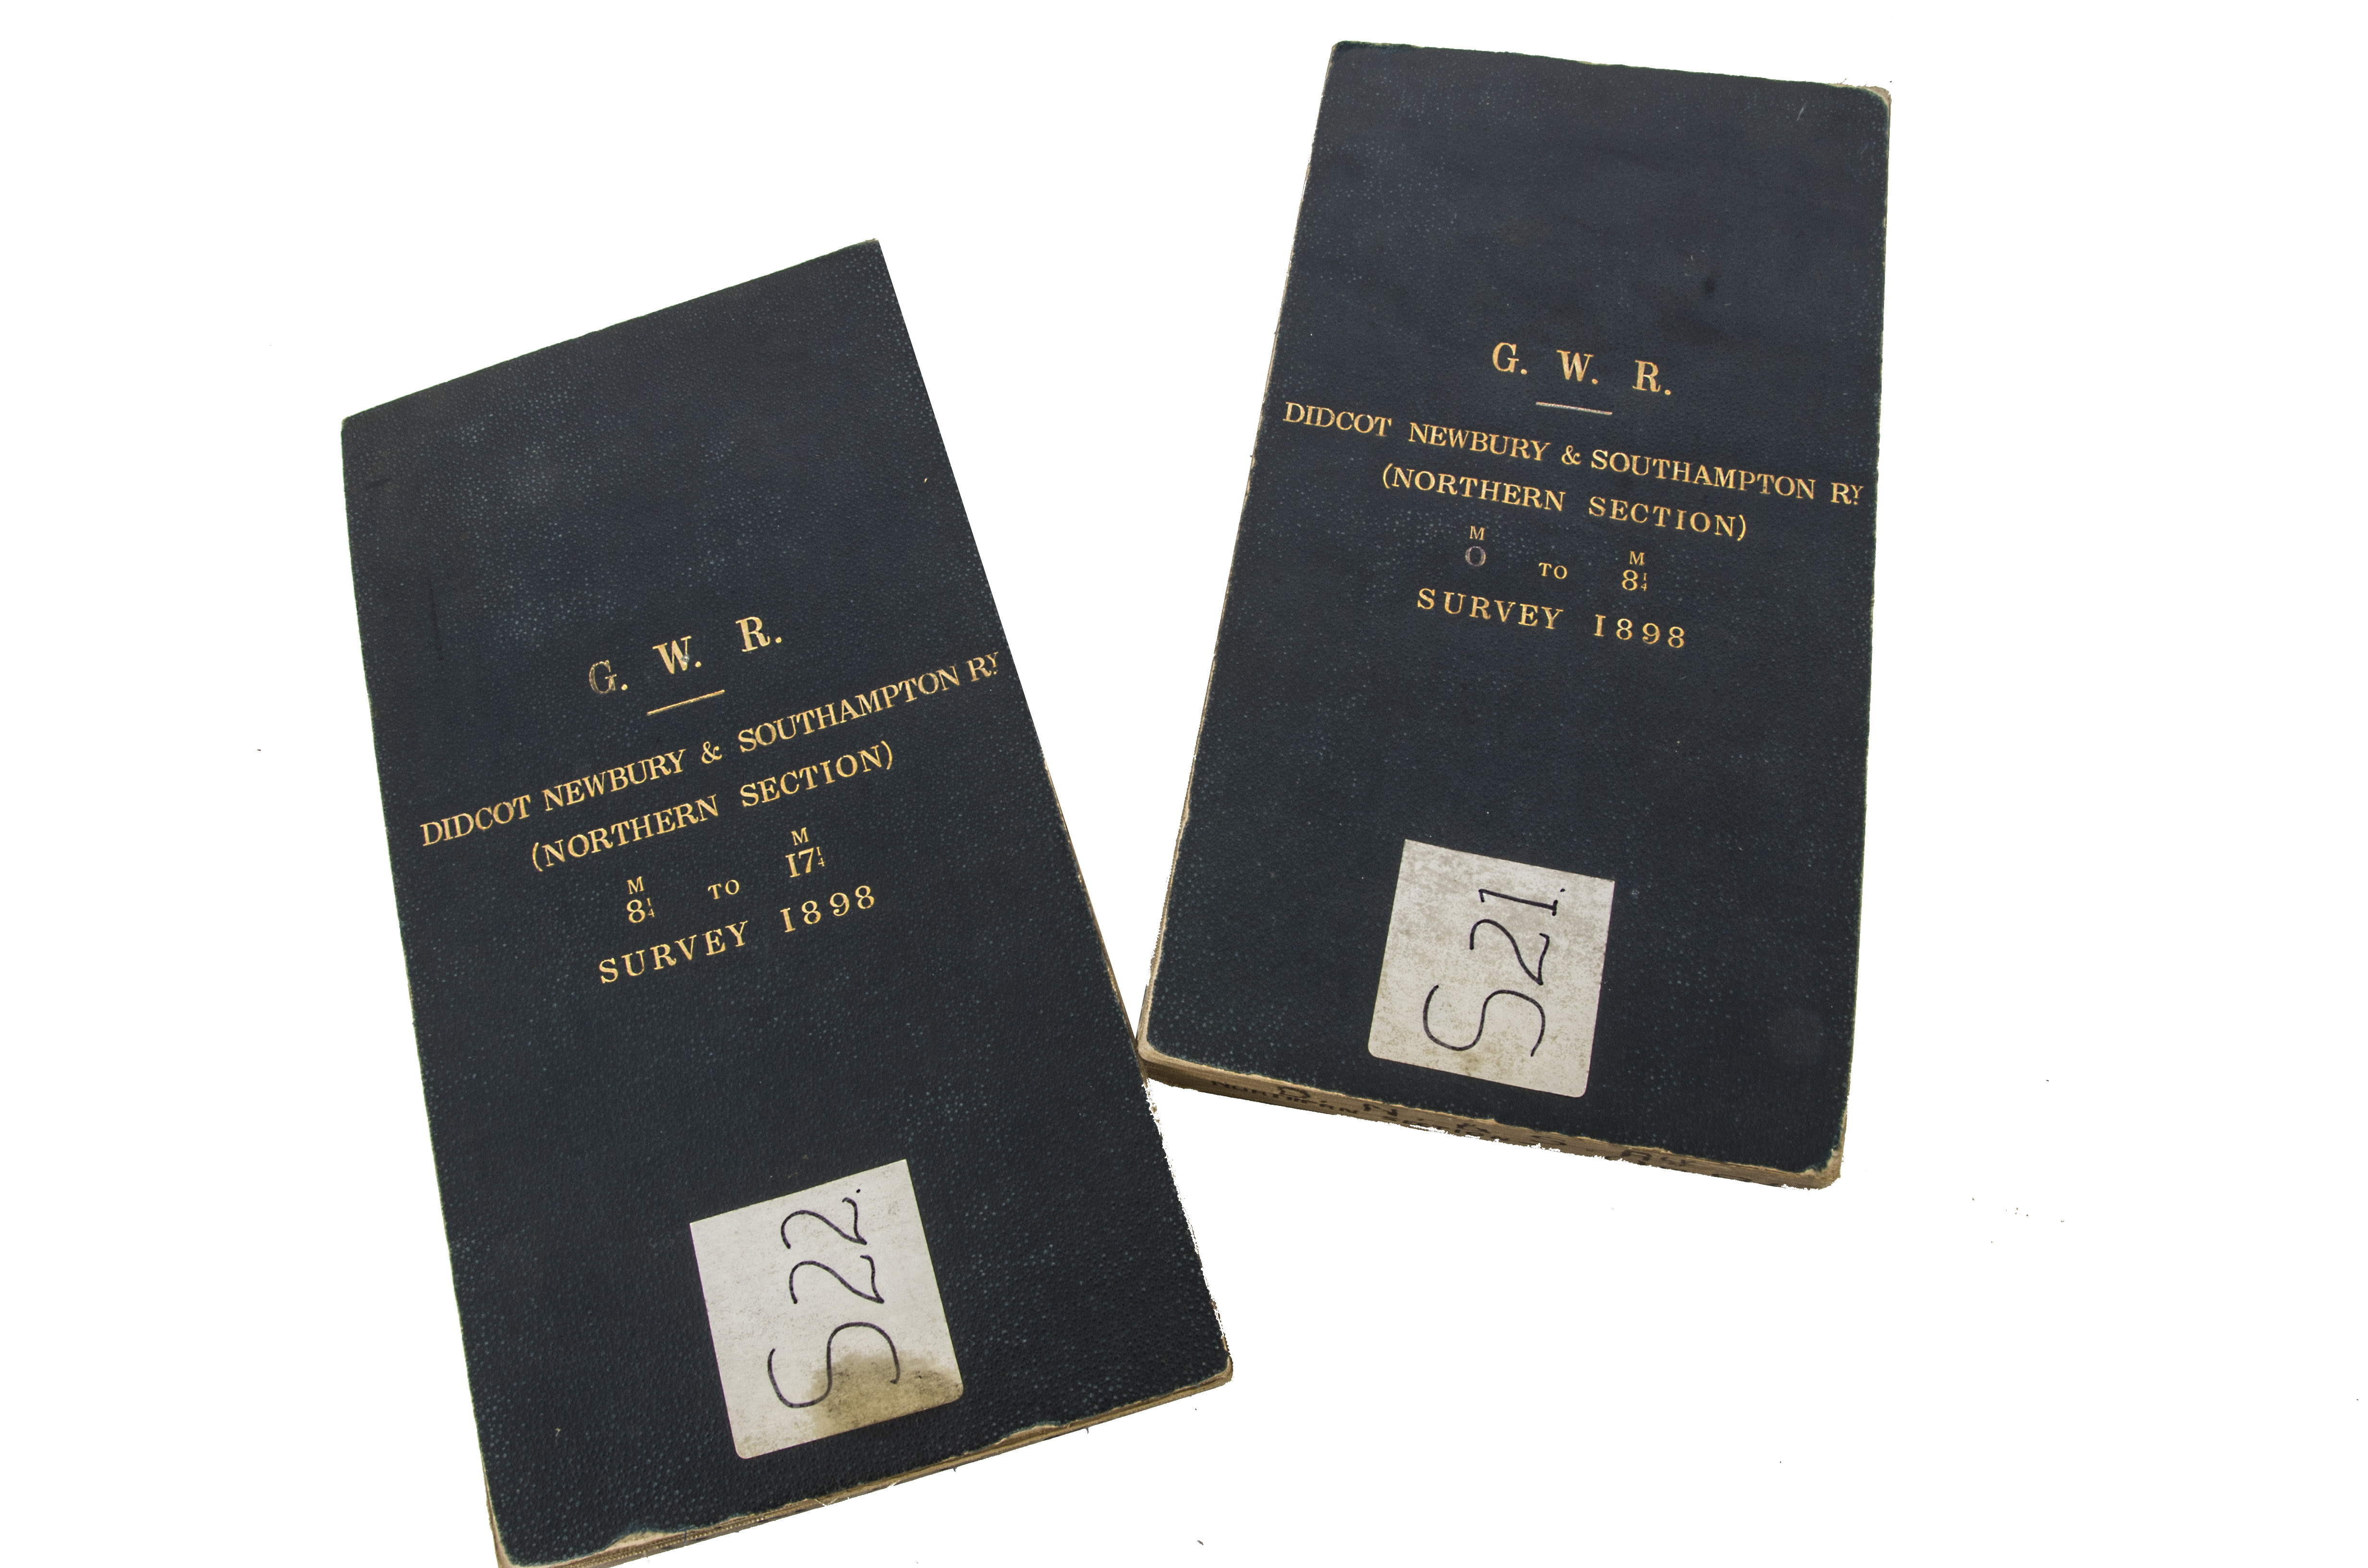 G.W.R Didcot Newbury & Southern Railway Survey Maps, both dated 1898, linen backed folding